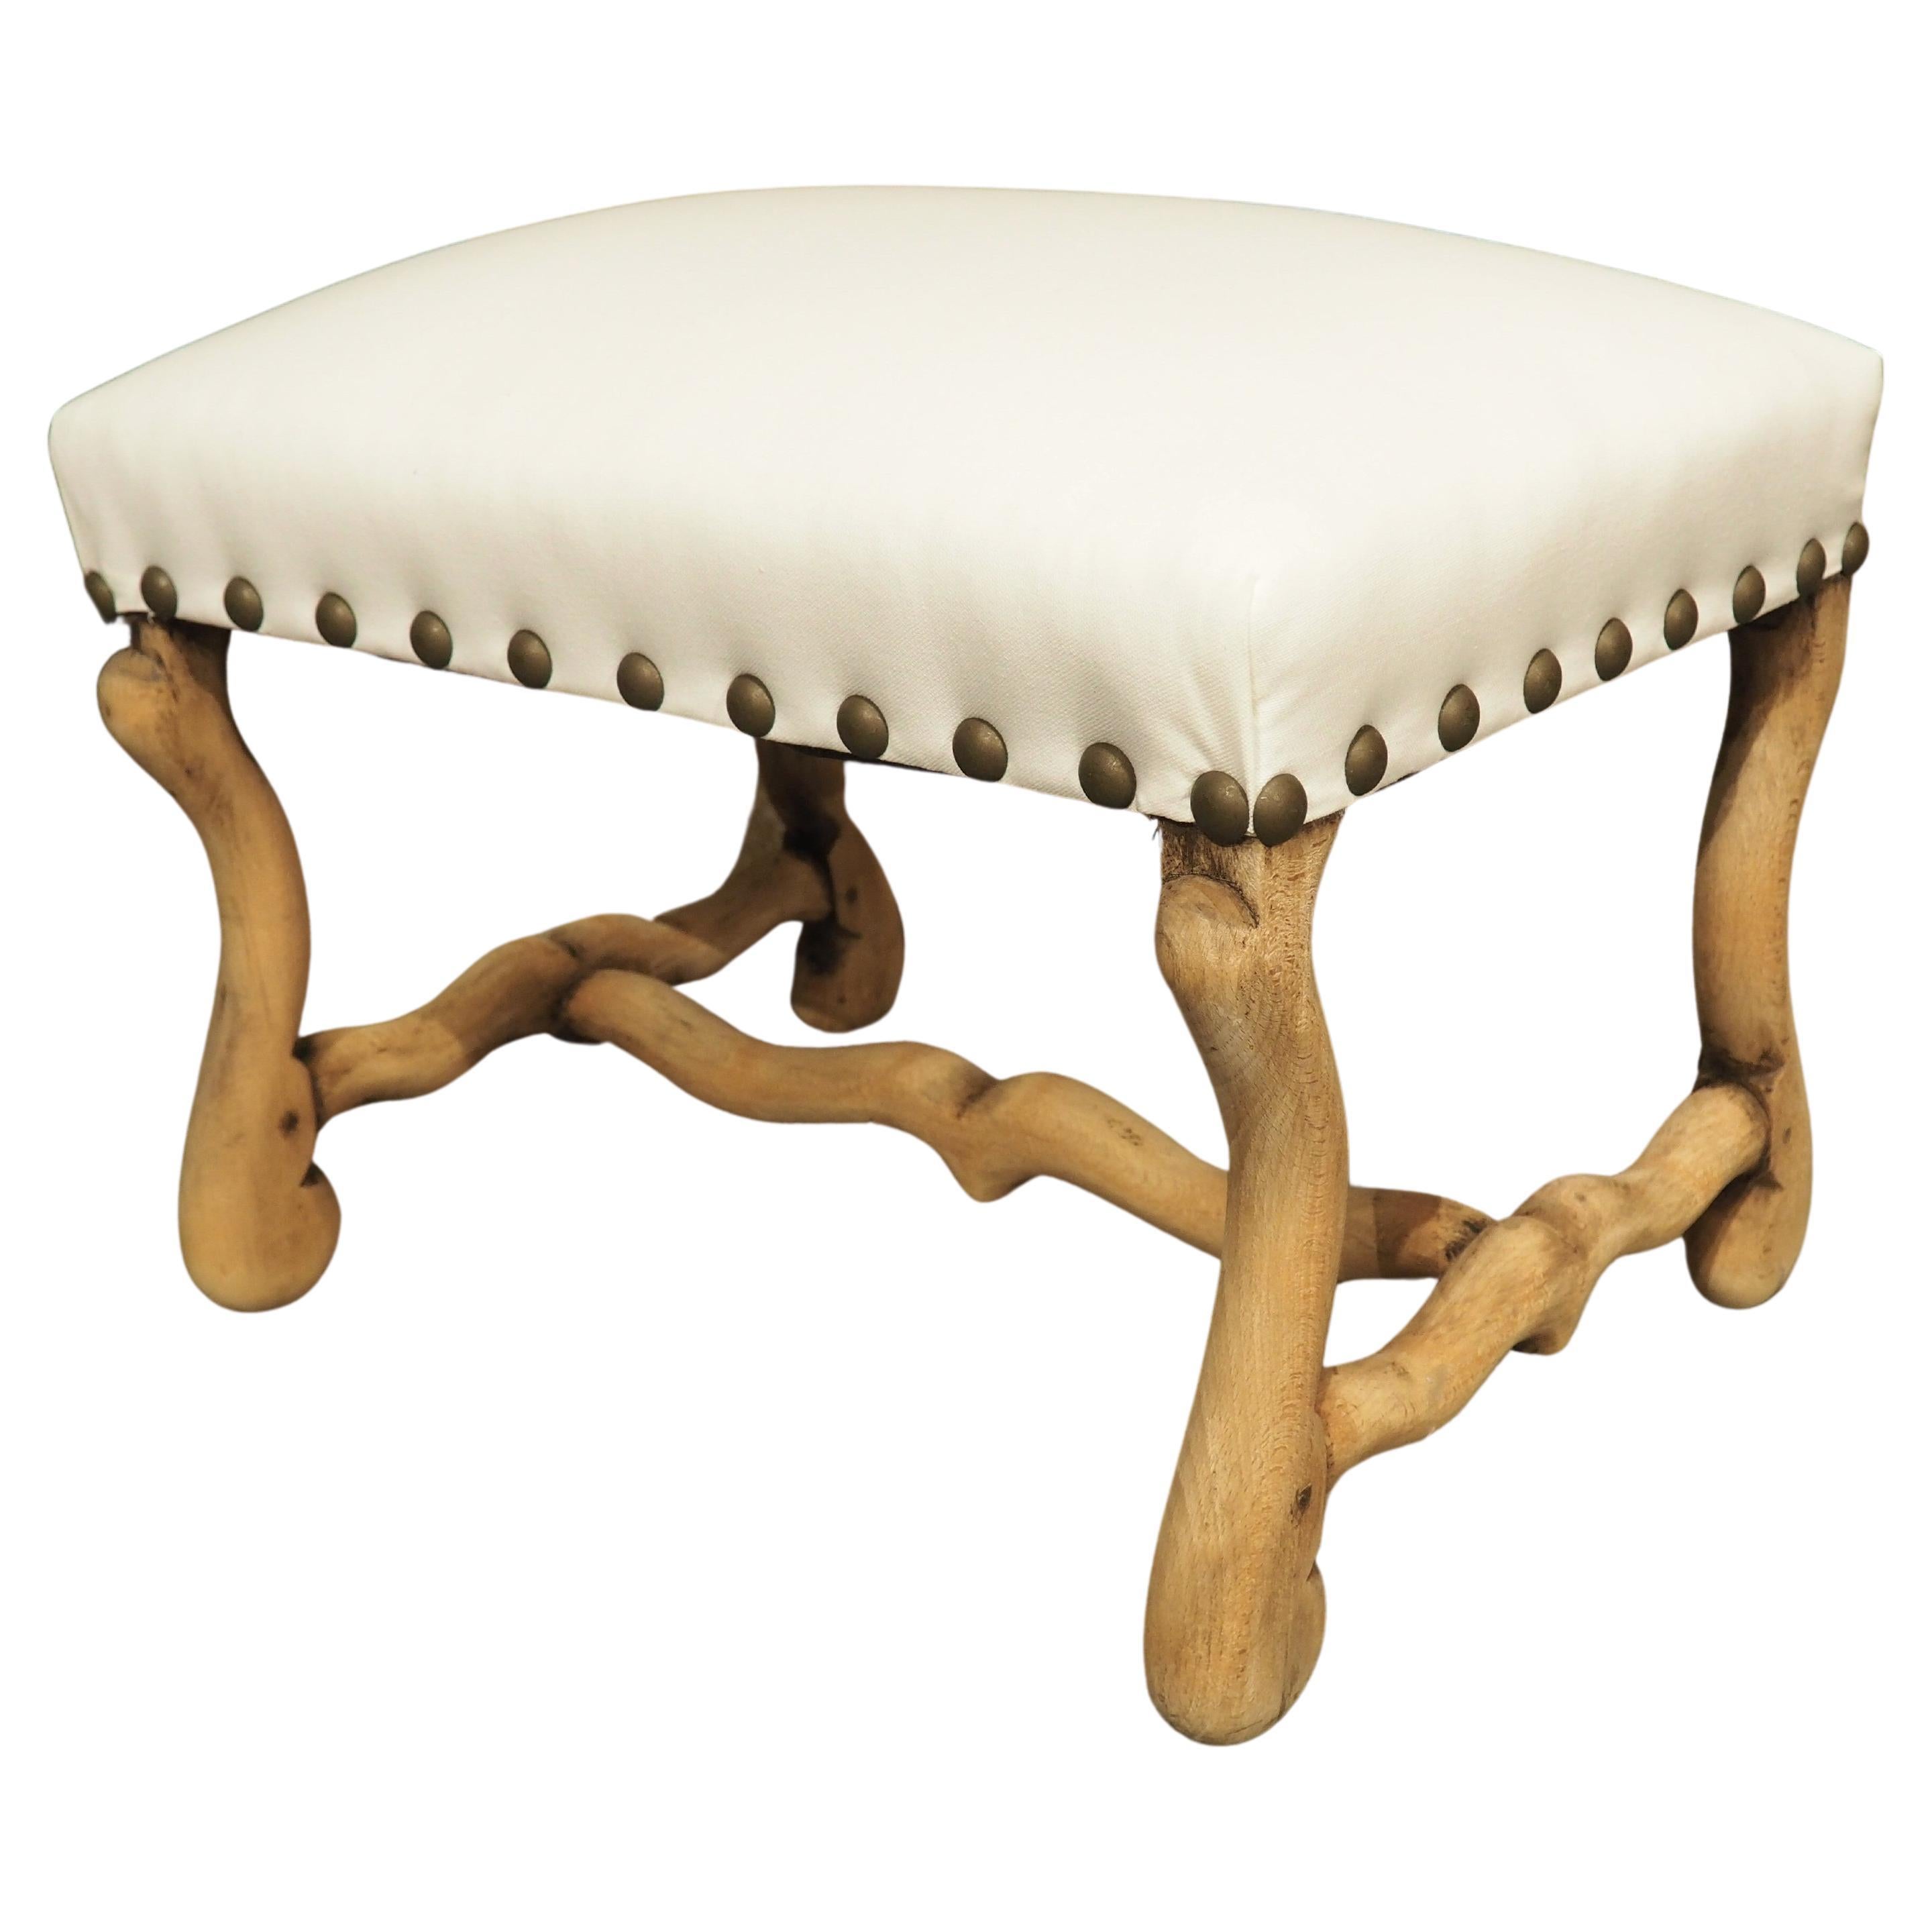 Bleached French Os De Mouton Tabouret Stool, White Cotton Upholstery, C. 1900 For Sale